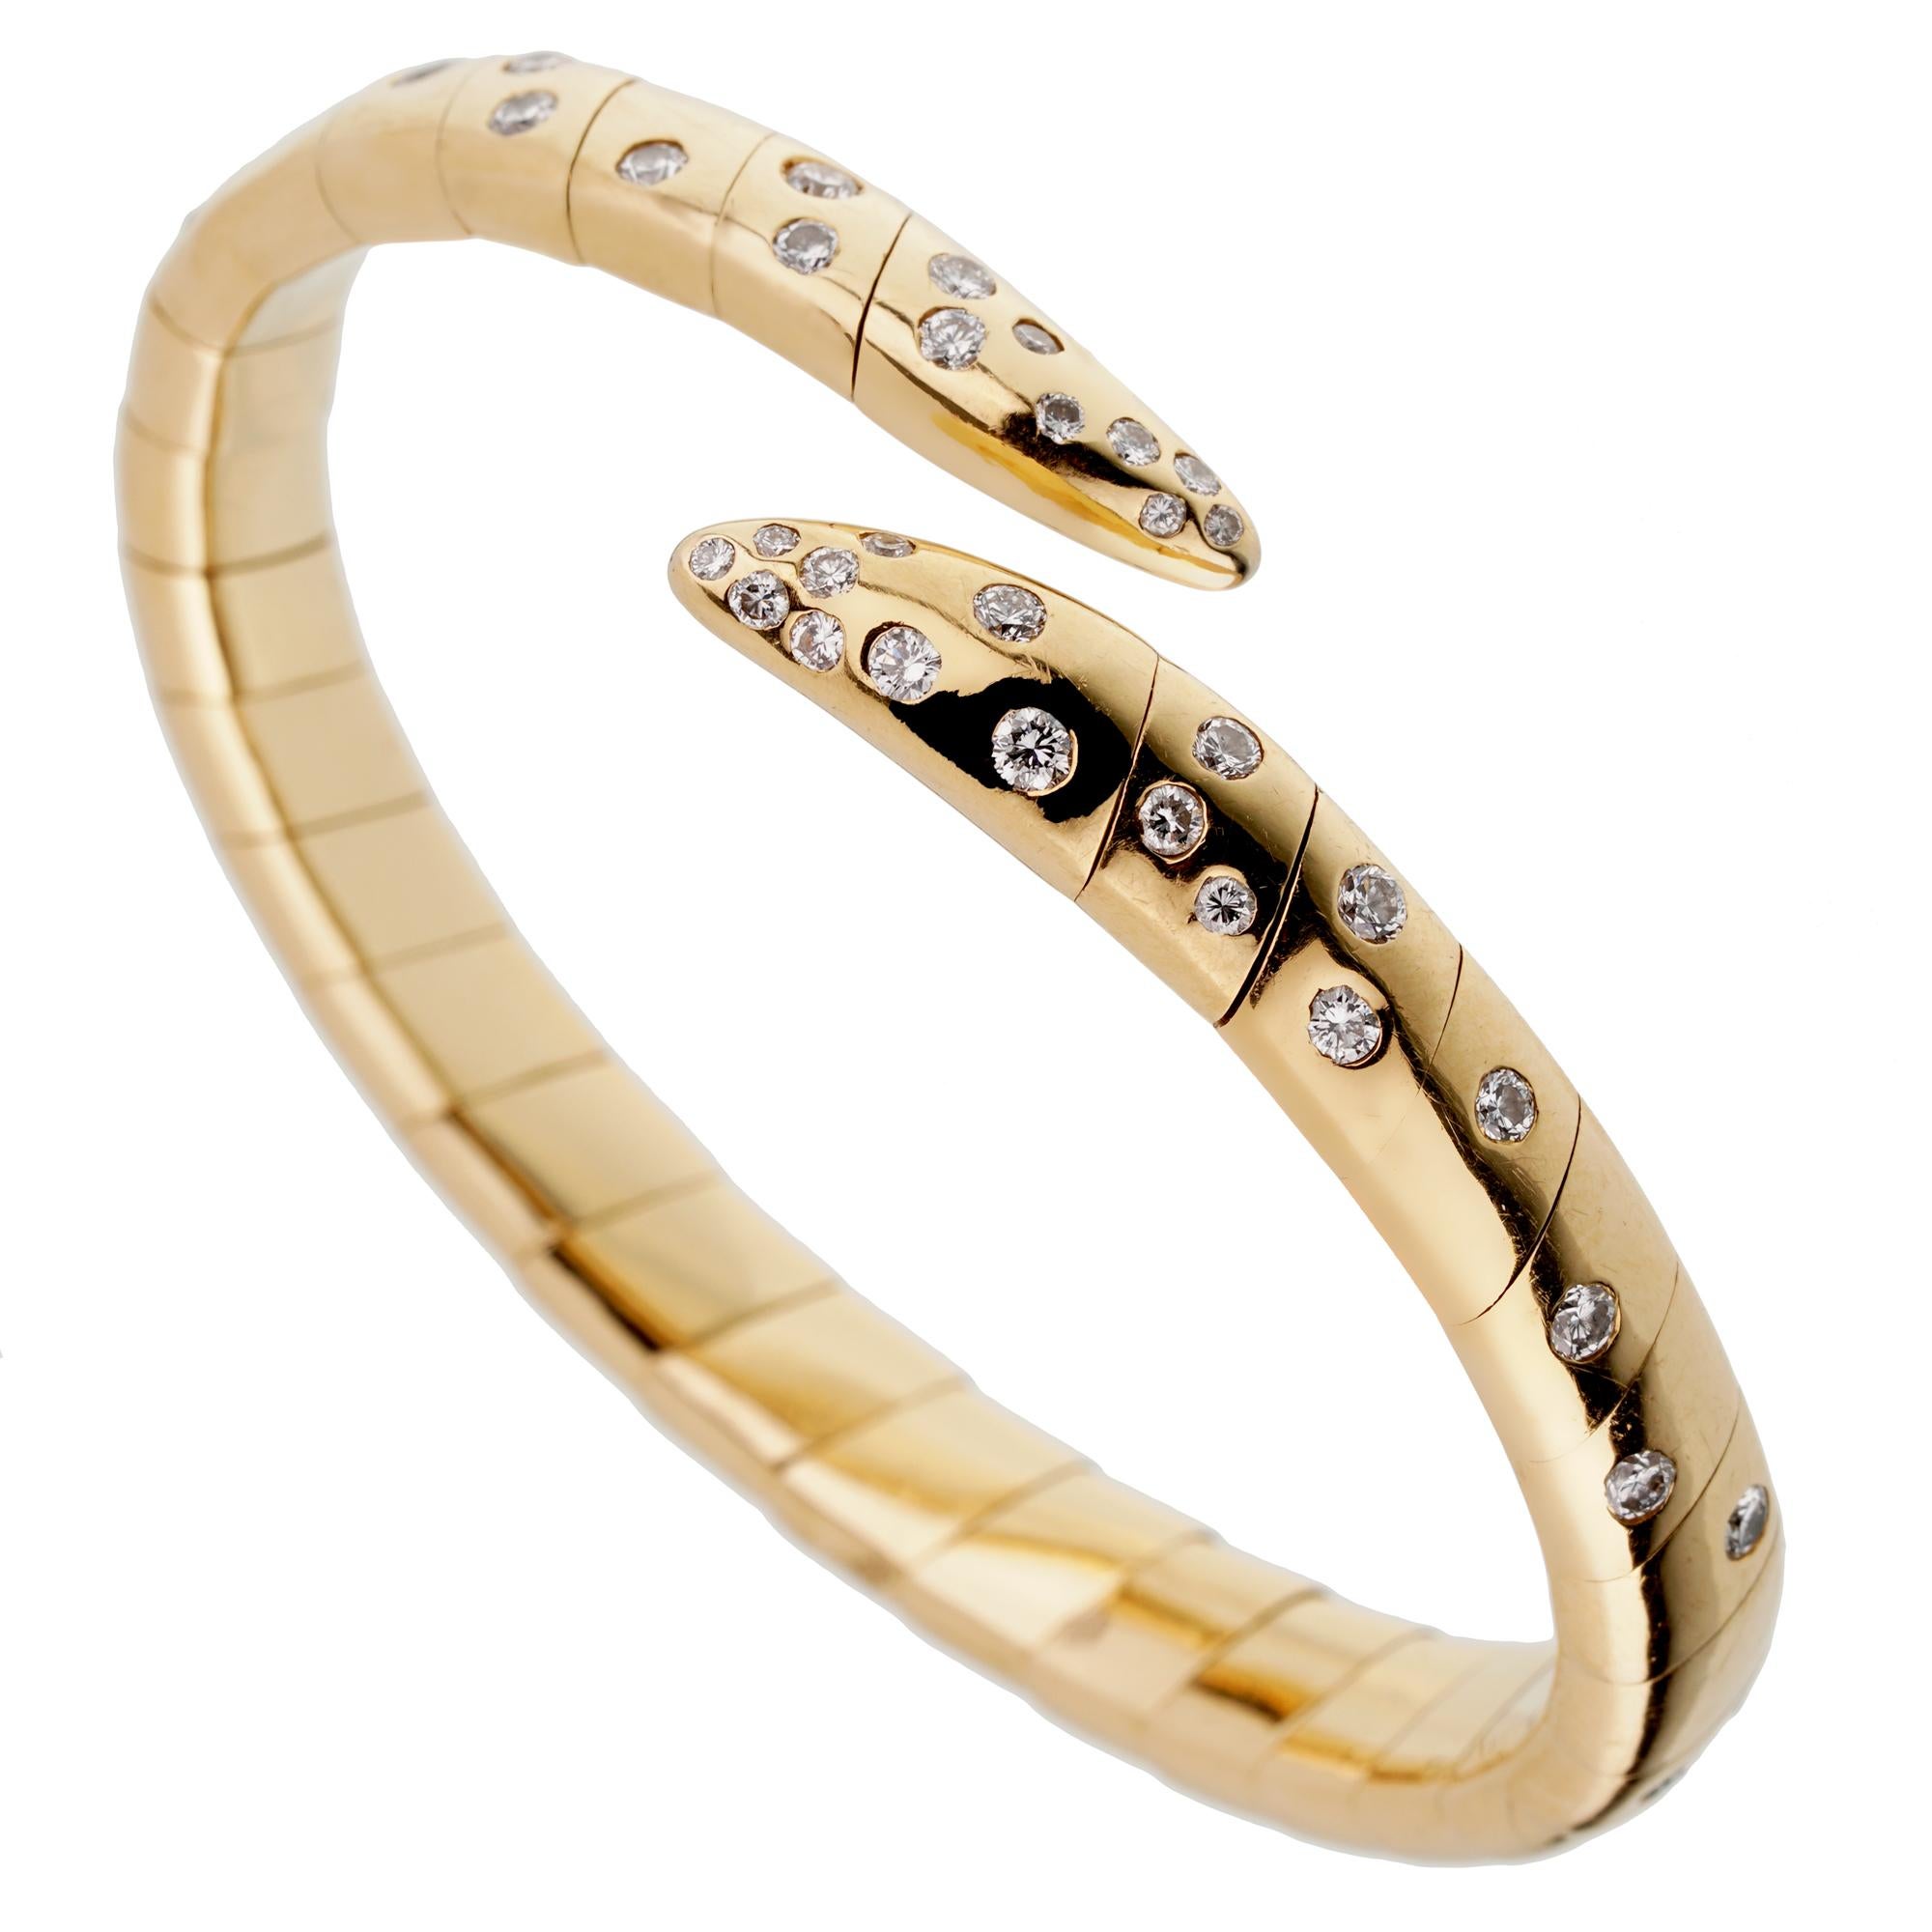 A magnificent Boucheron yellow gold bangle bracelet adorned with the finest round brilliant cut diamonds in shimmering 18k yellow gold. The bracelet has a weight of 56.4 grams and will fit a wrist of up to 7